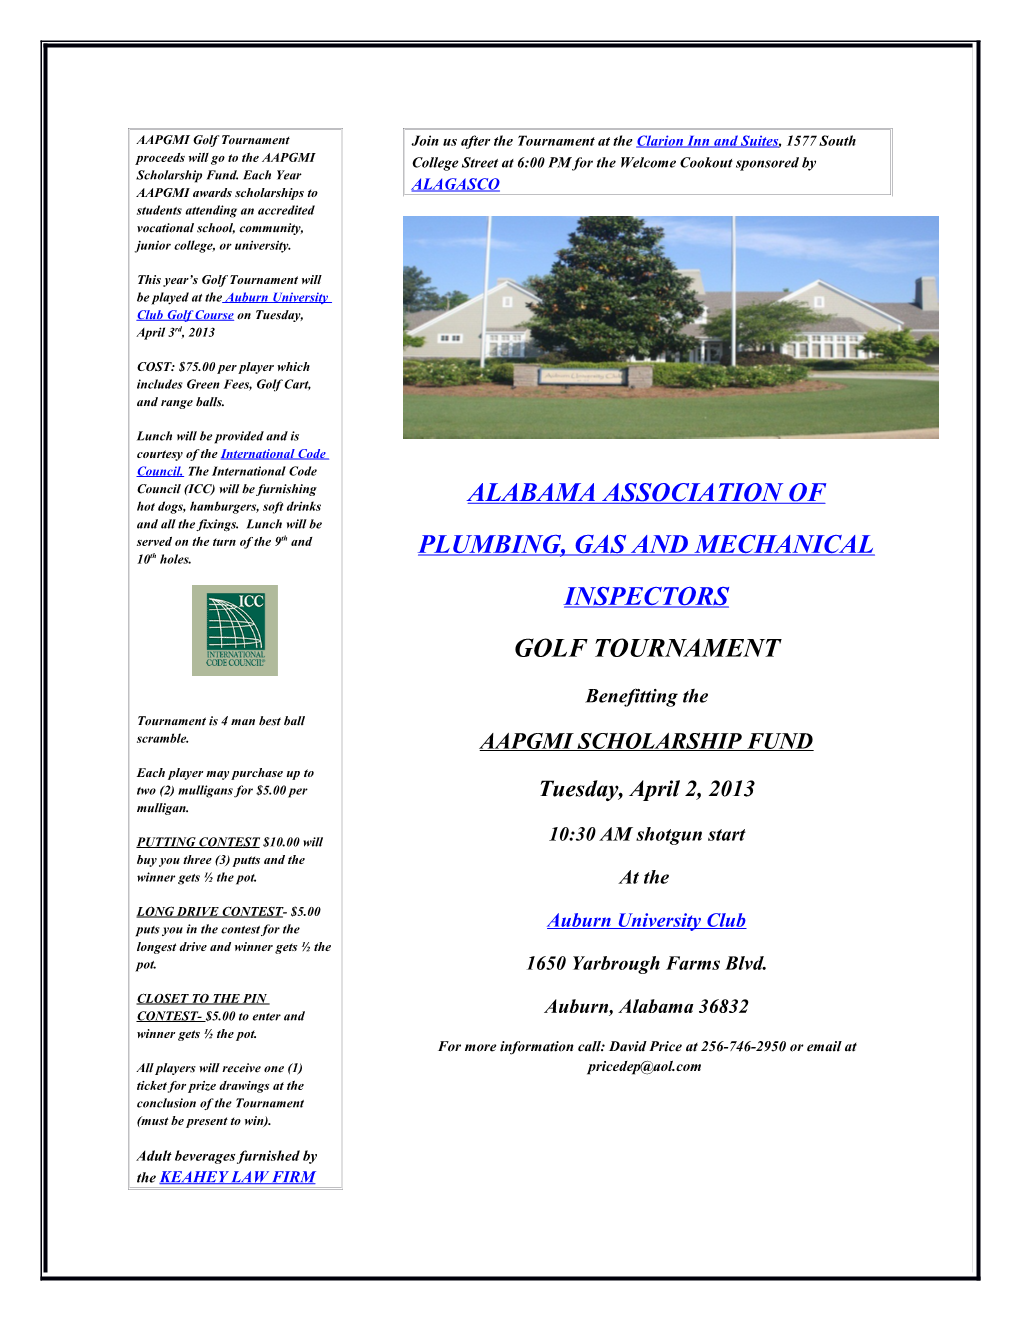 AAPGMI Golf Tournament Proceeds Will Go to the AAPGMI Scholarship Fund. Each Year AAPGMI